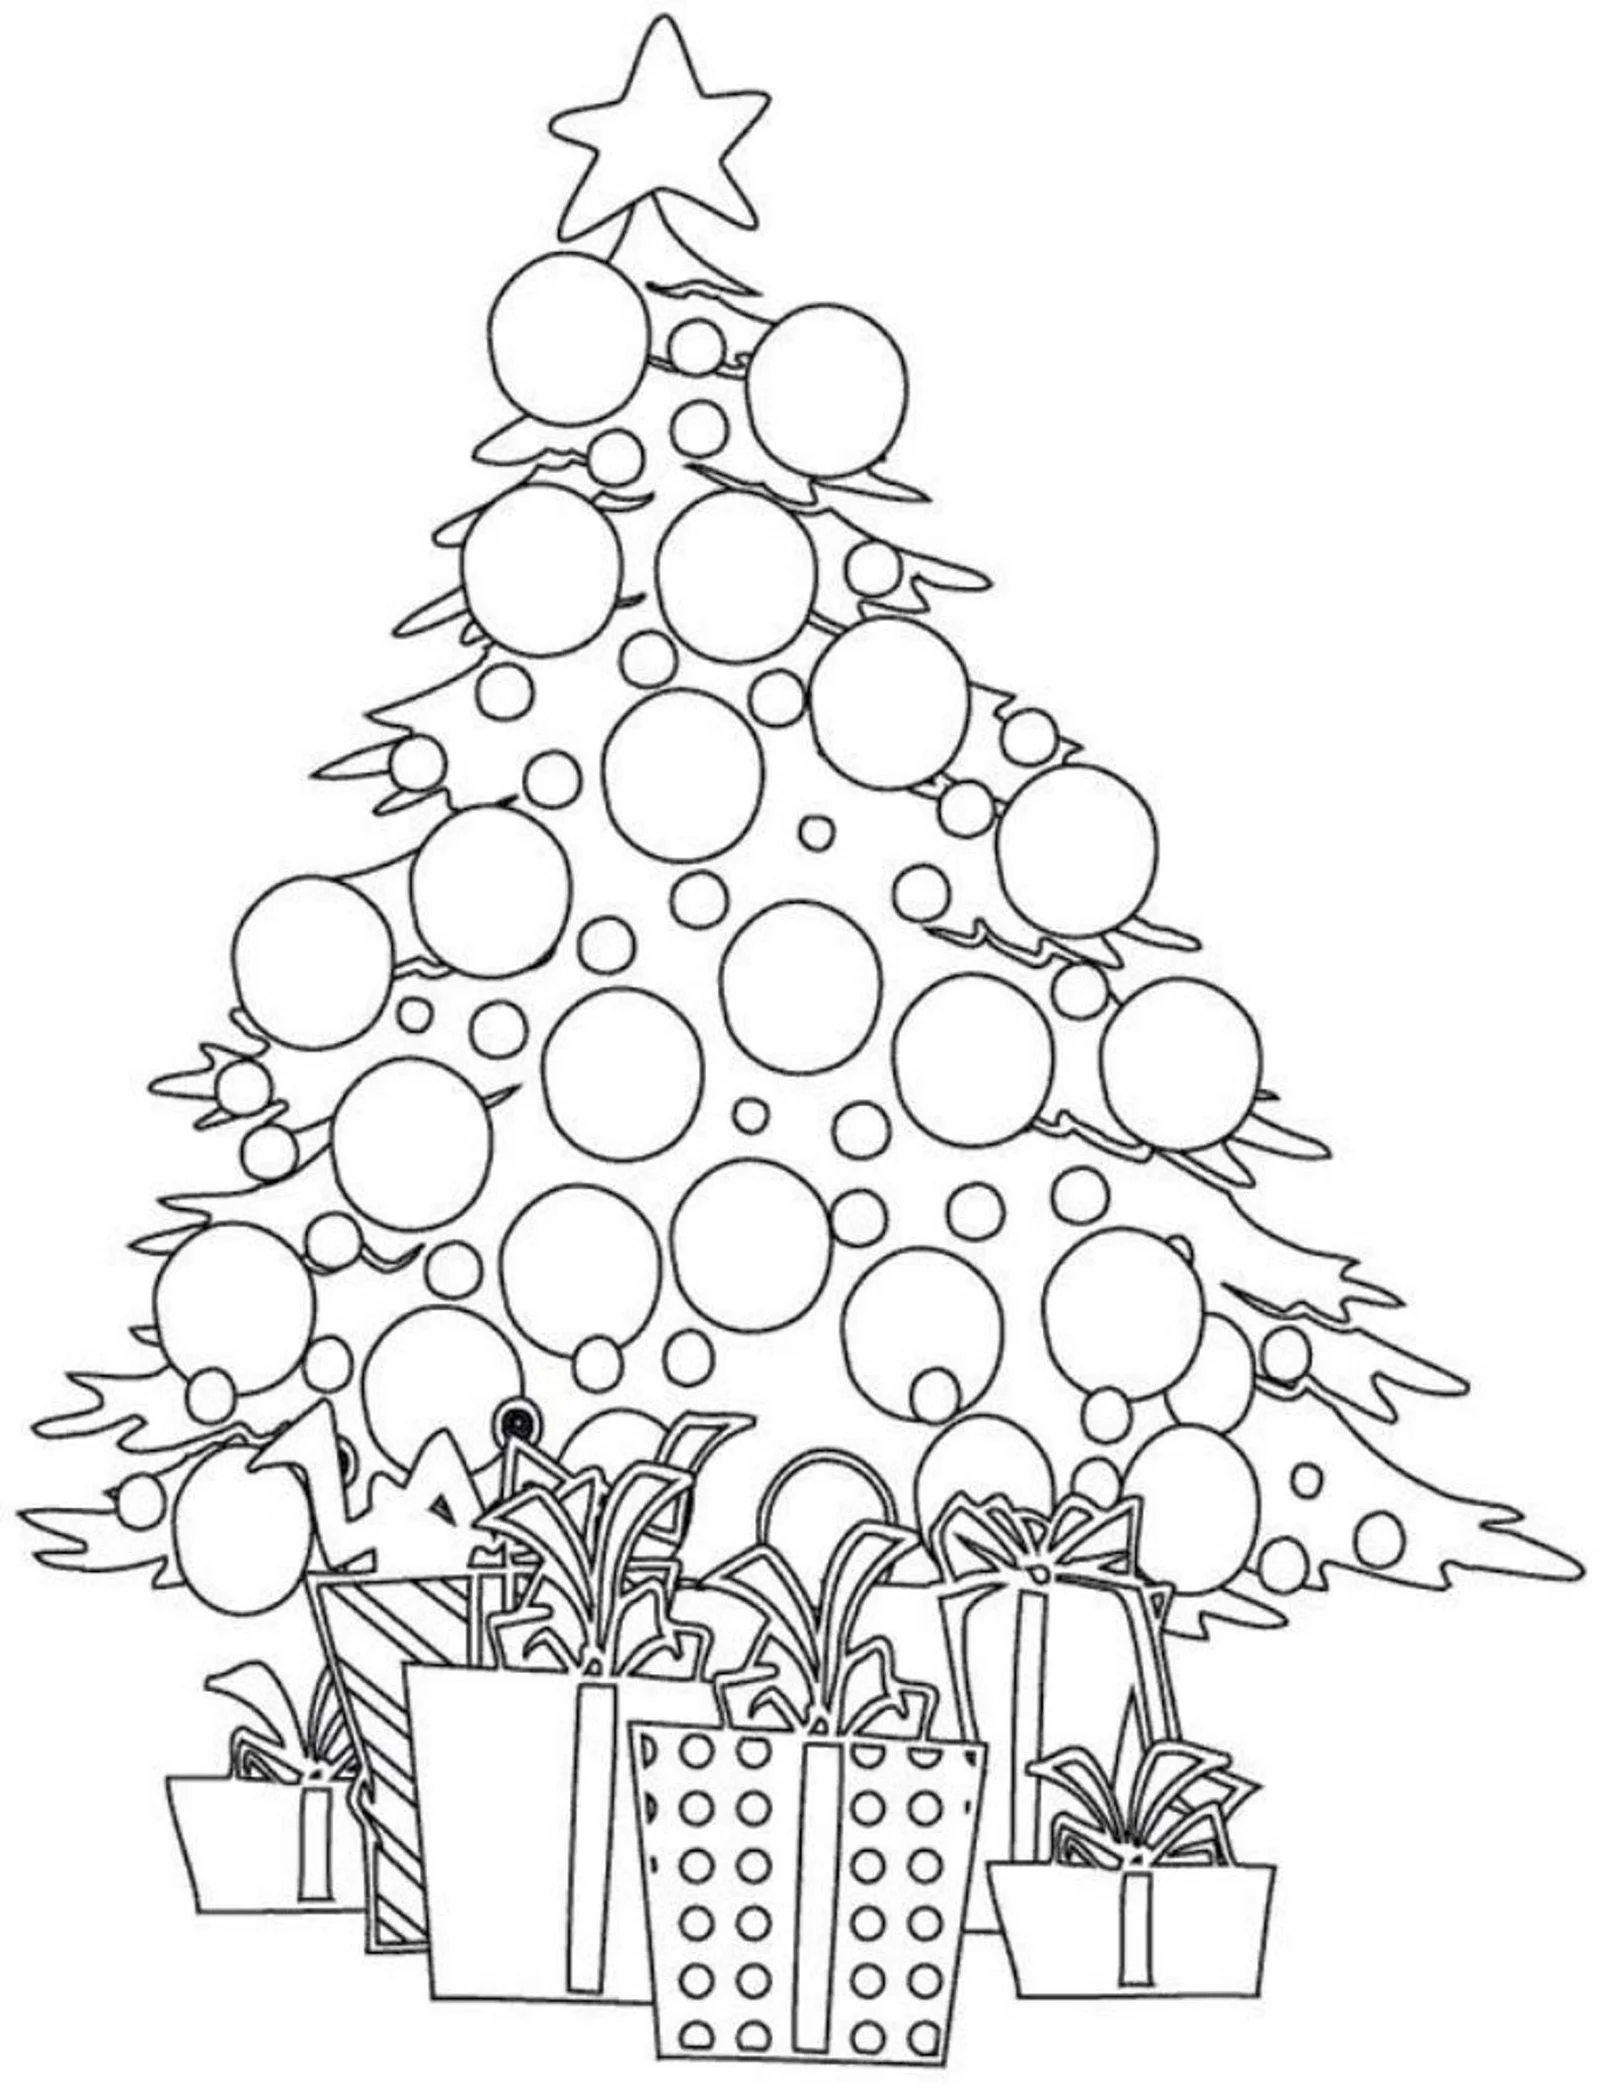 Christmas Tree With Presents Coloring Pages